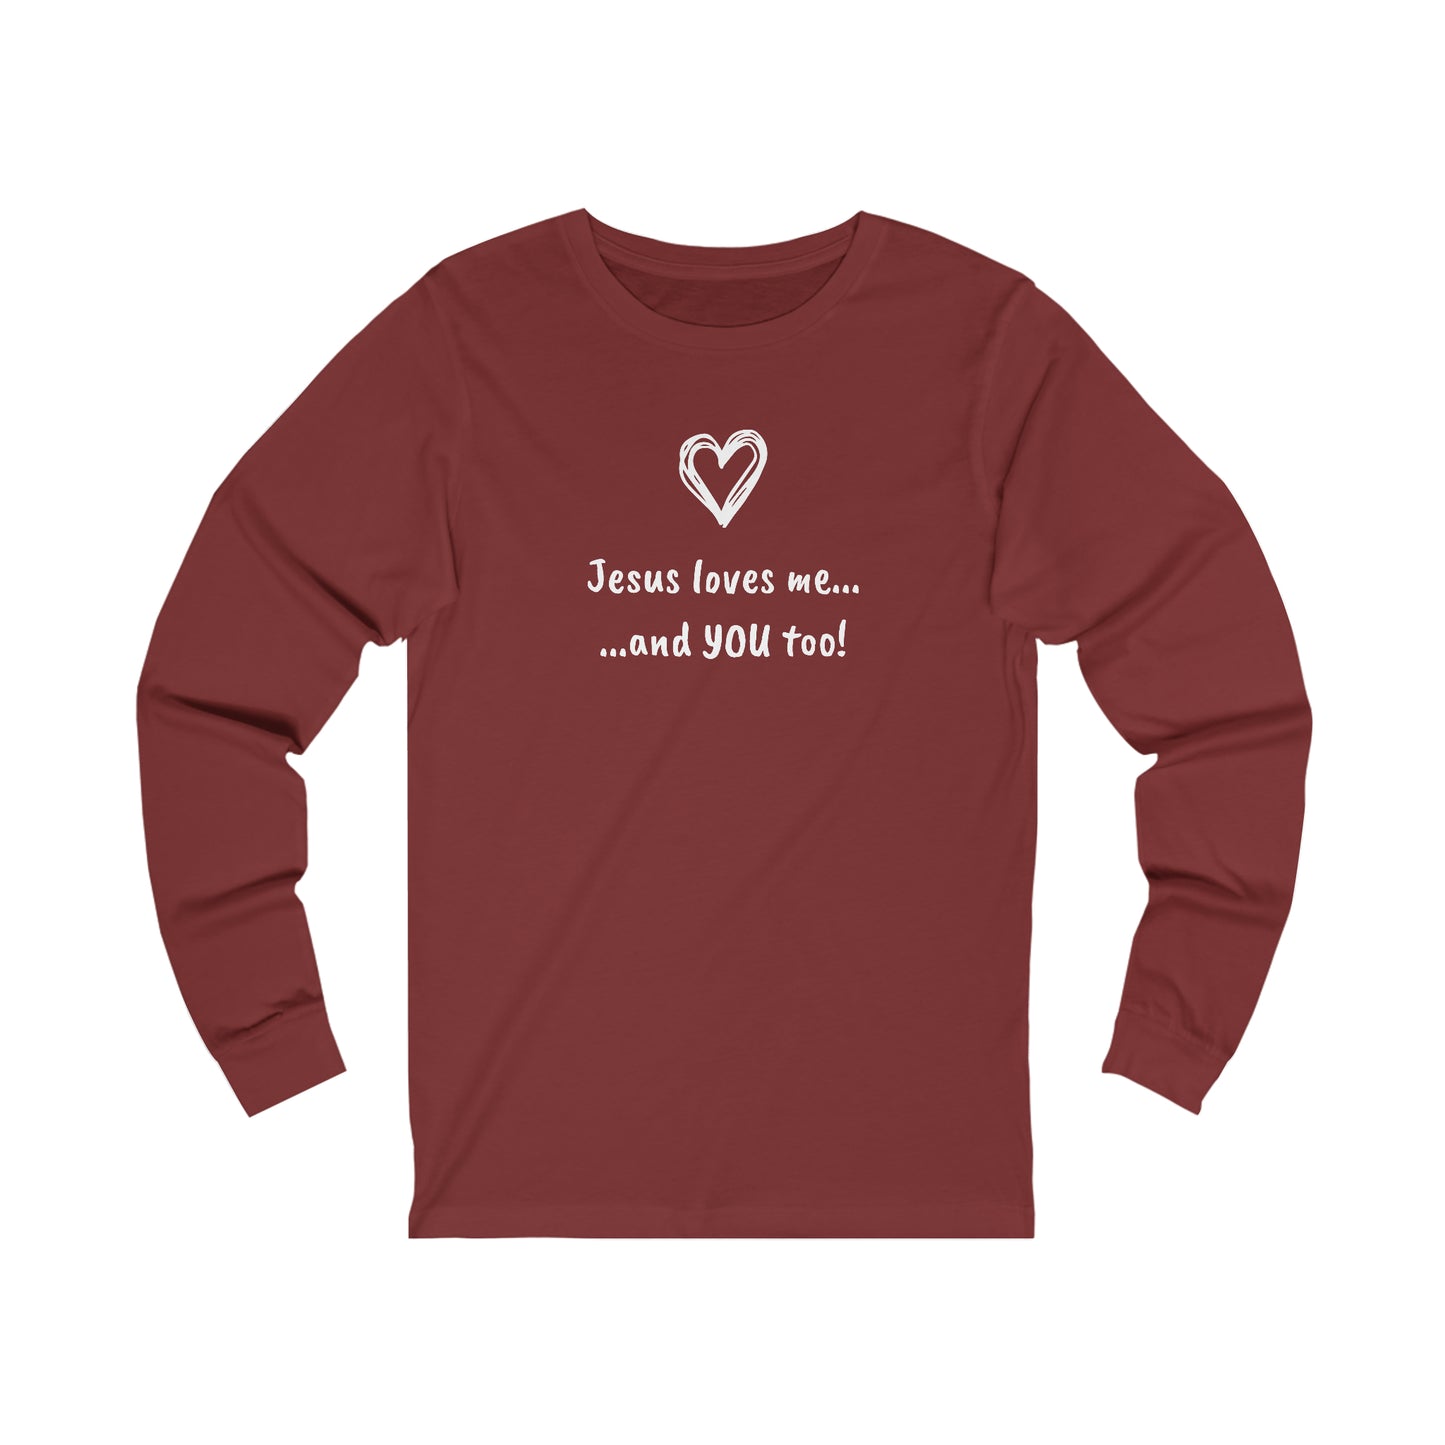 Unisex Jersey Long Sleeve Tee - Jesus Loves Me...and YOU too!